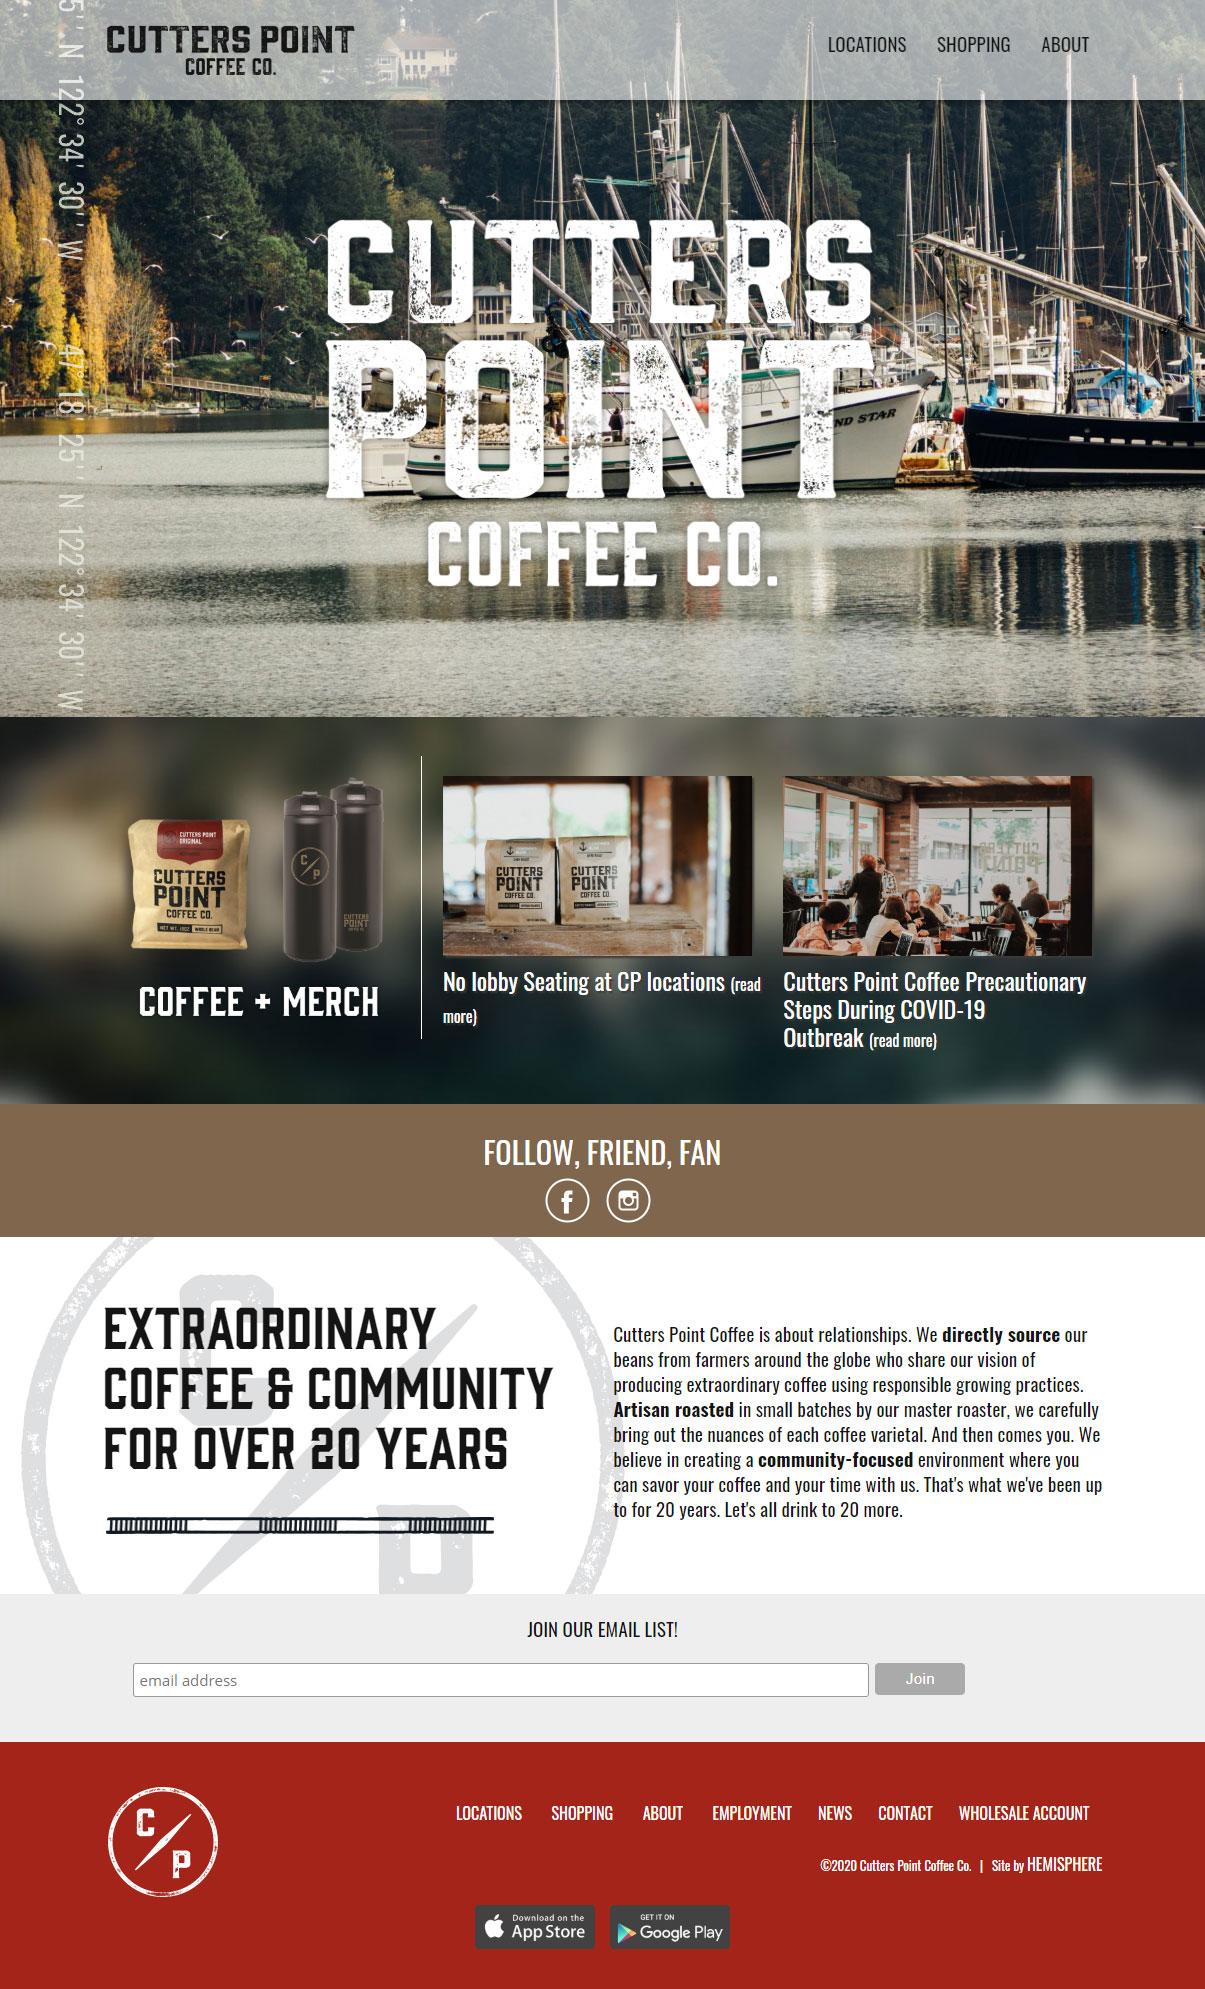 Cutters Point Coffee website homepage layout